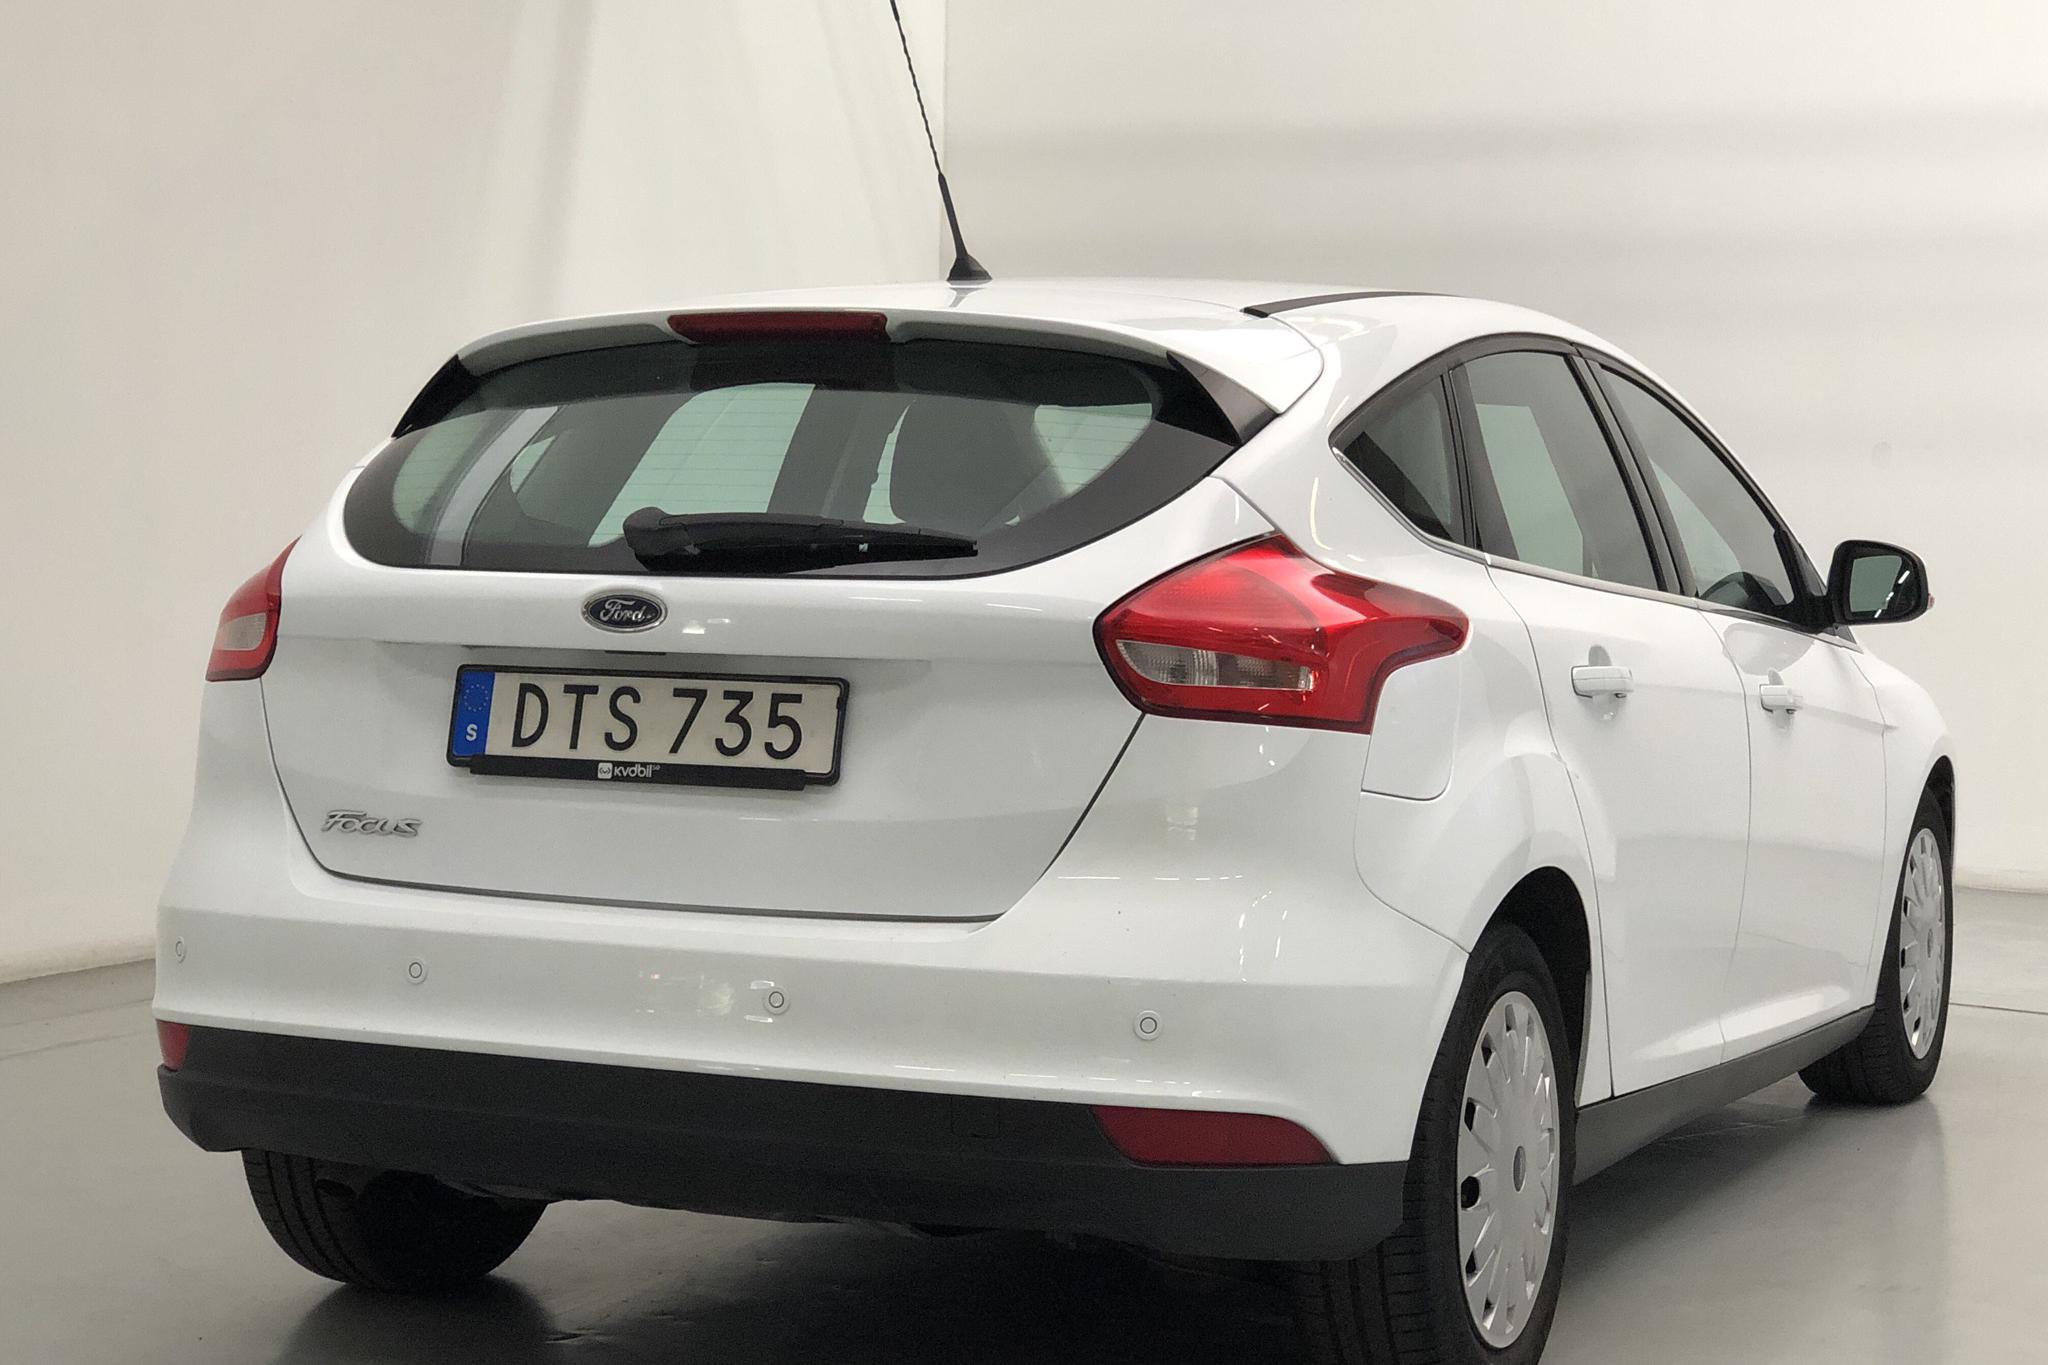 Ford Focus 1.5 TDCi ECOnetic 5dr (105hk) - 52 260 km - Manual - white - 2017